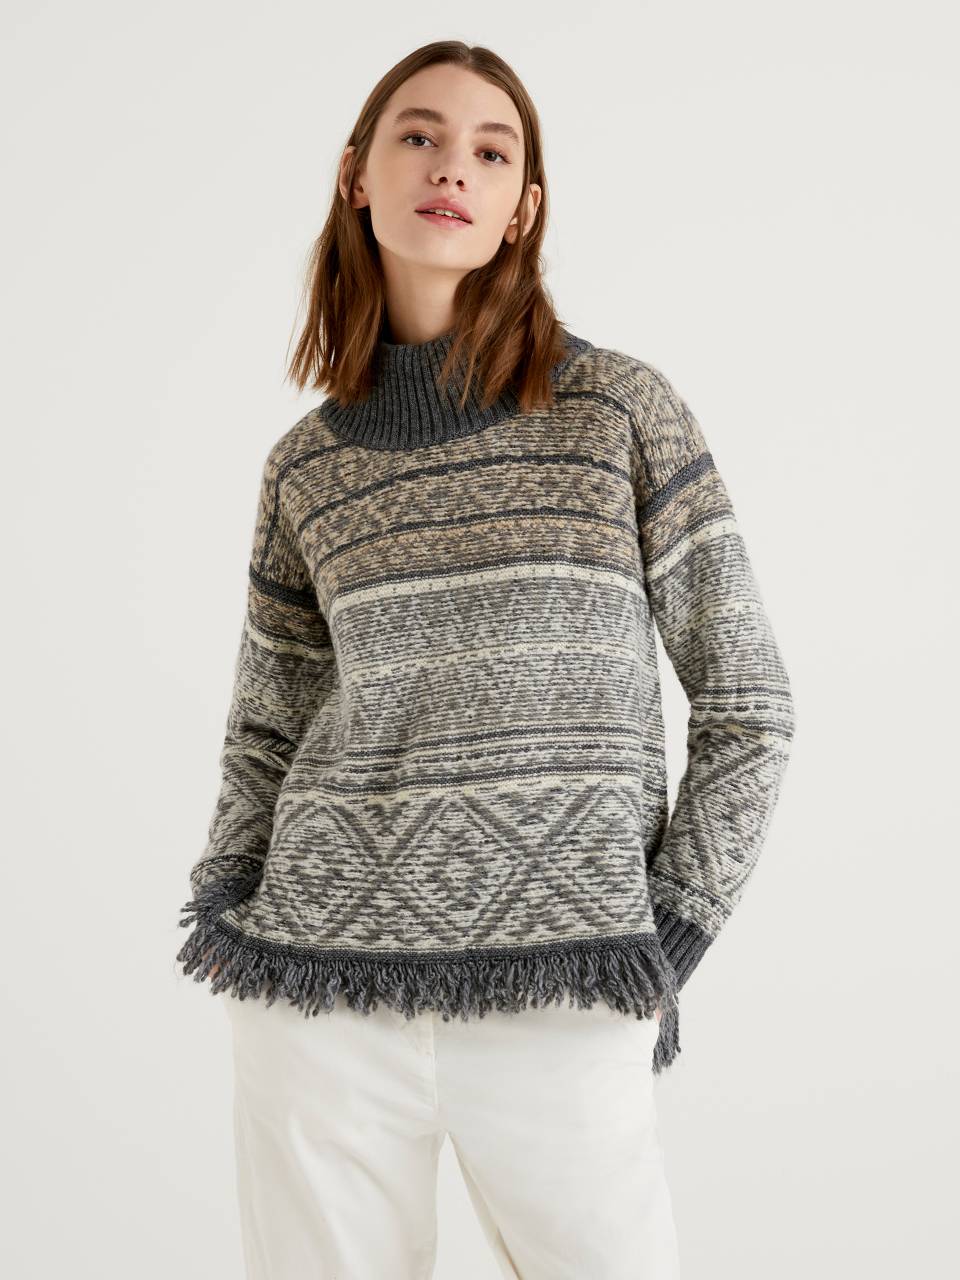 Benetton Reversible sweater with jacquard knit. 1